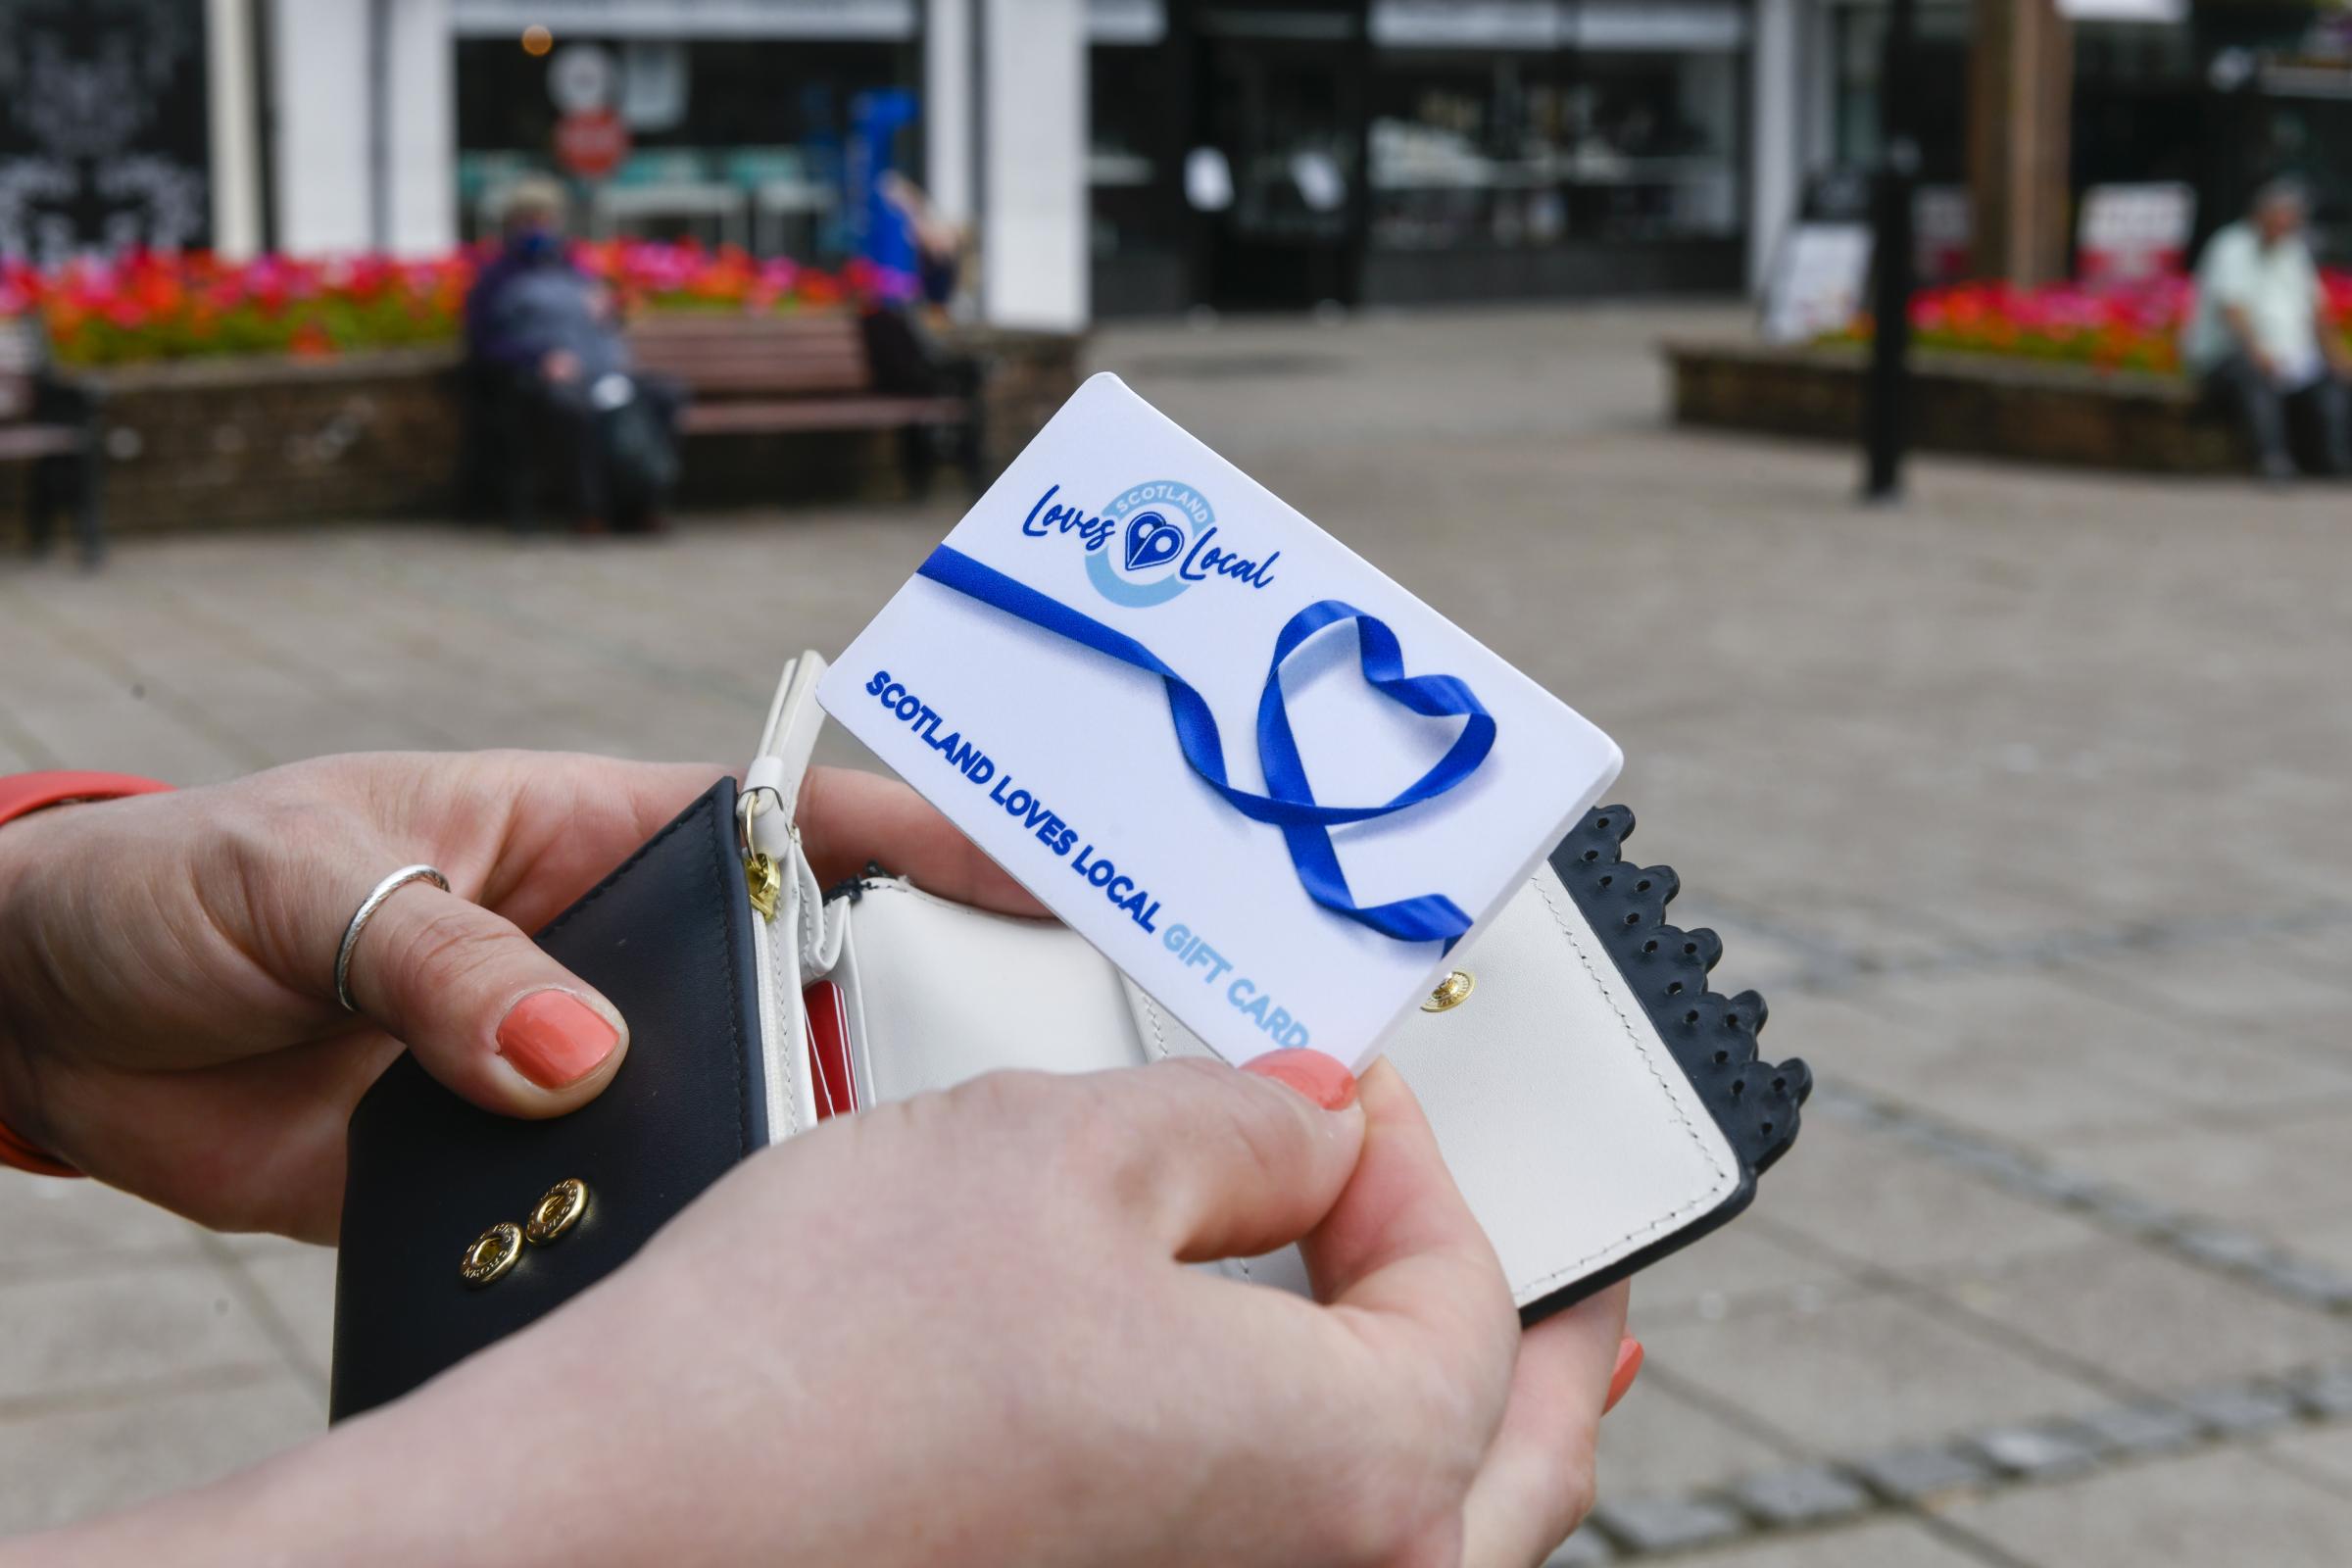 Do you qualify for a £105 gift card to spend in Glasgow from the council?